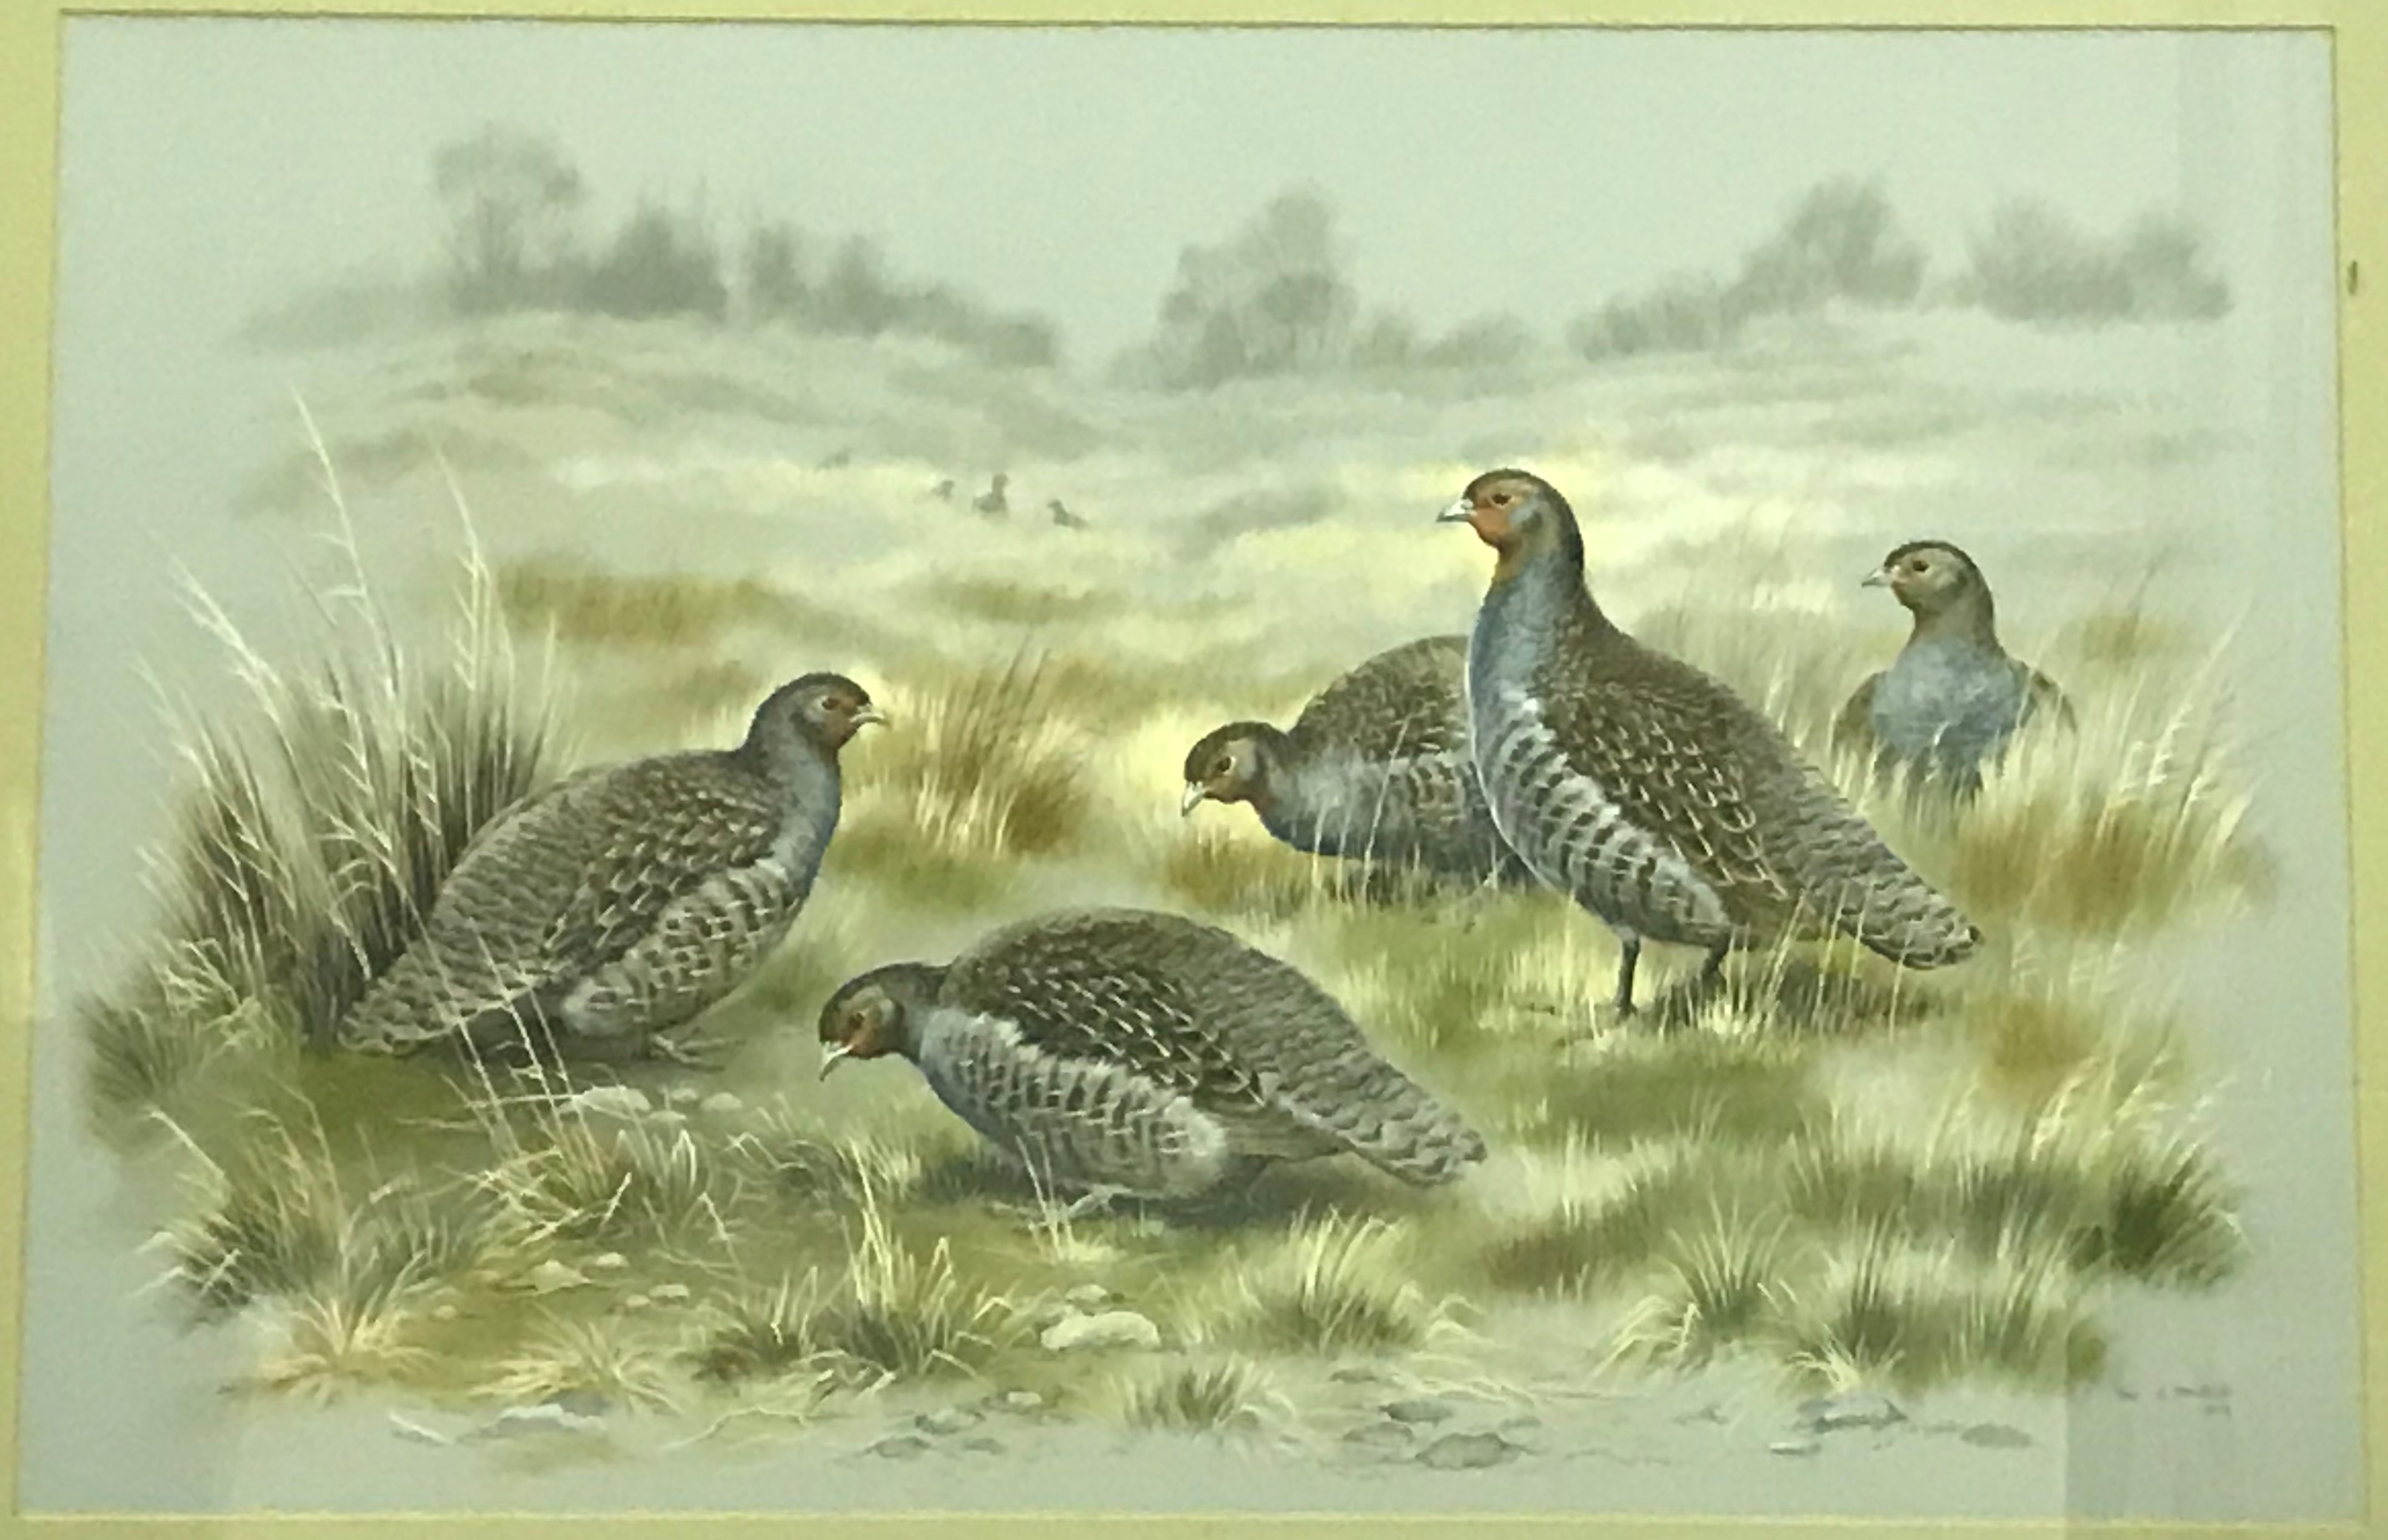 PAUL A NICHOLAS "Study of Grey Legged Partridge in landscape", watercolour heightened with white,